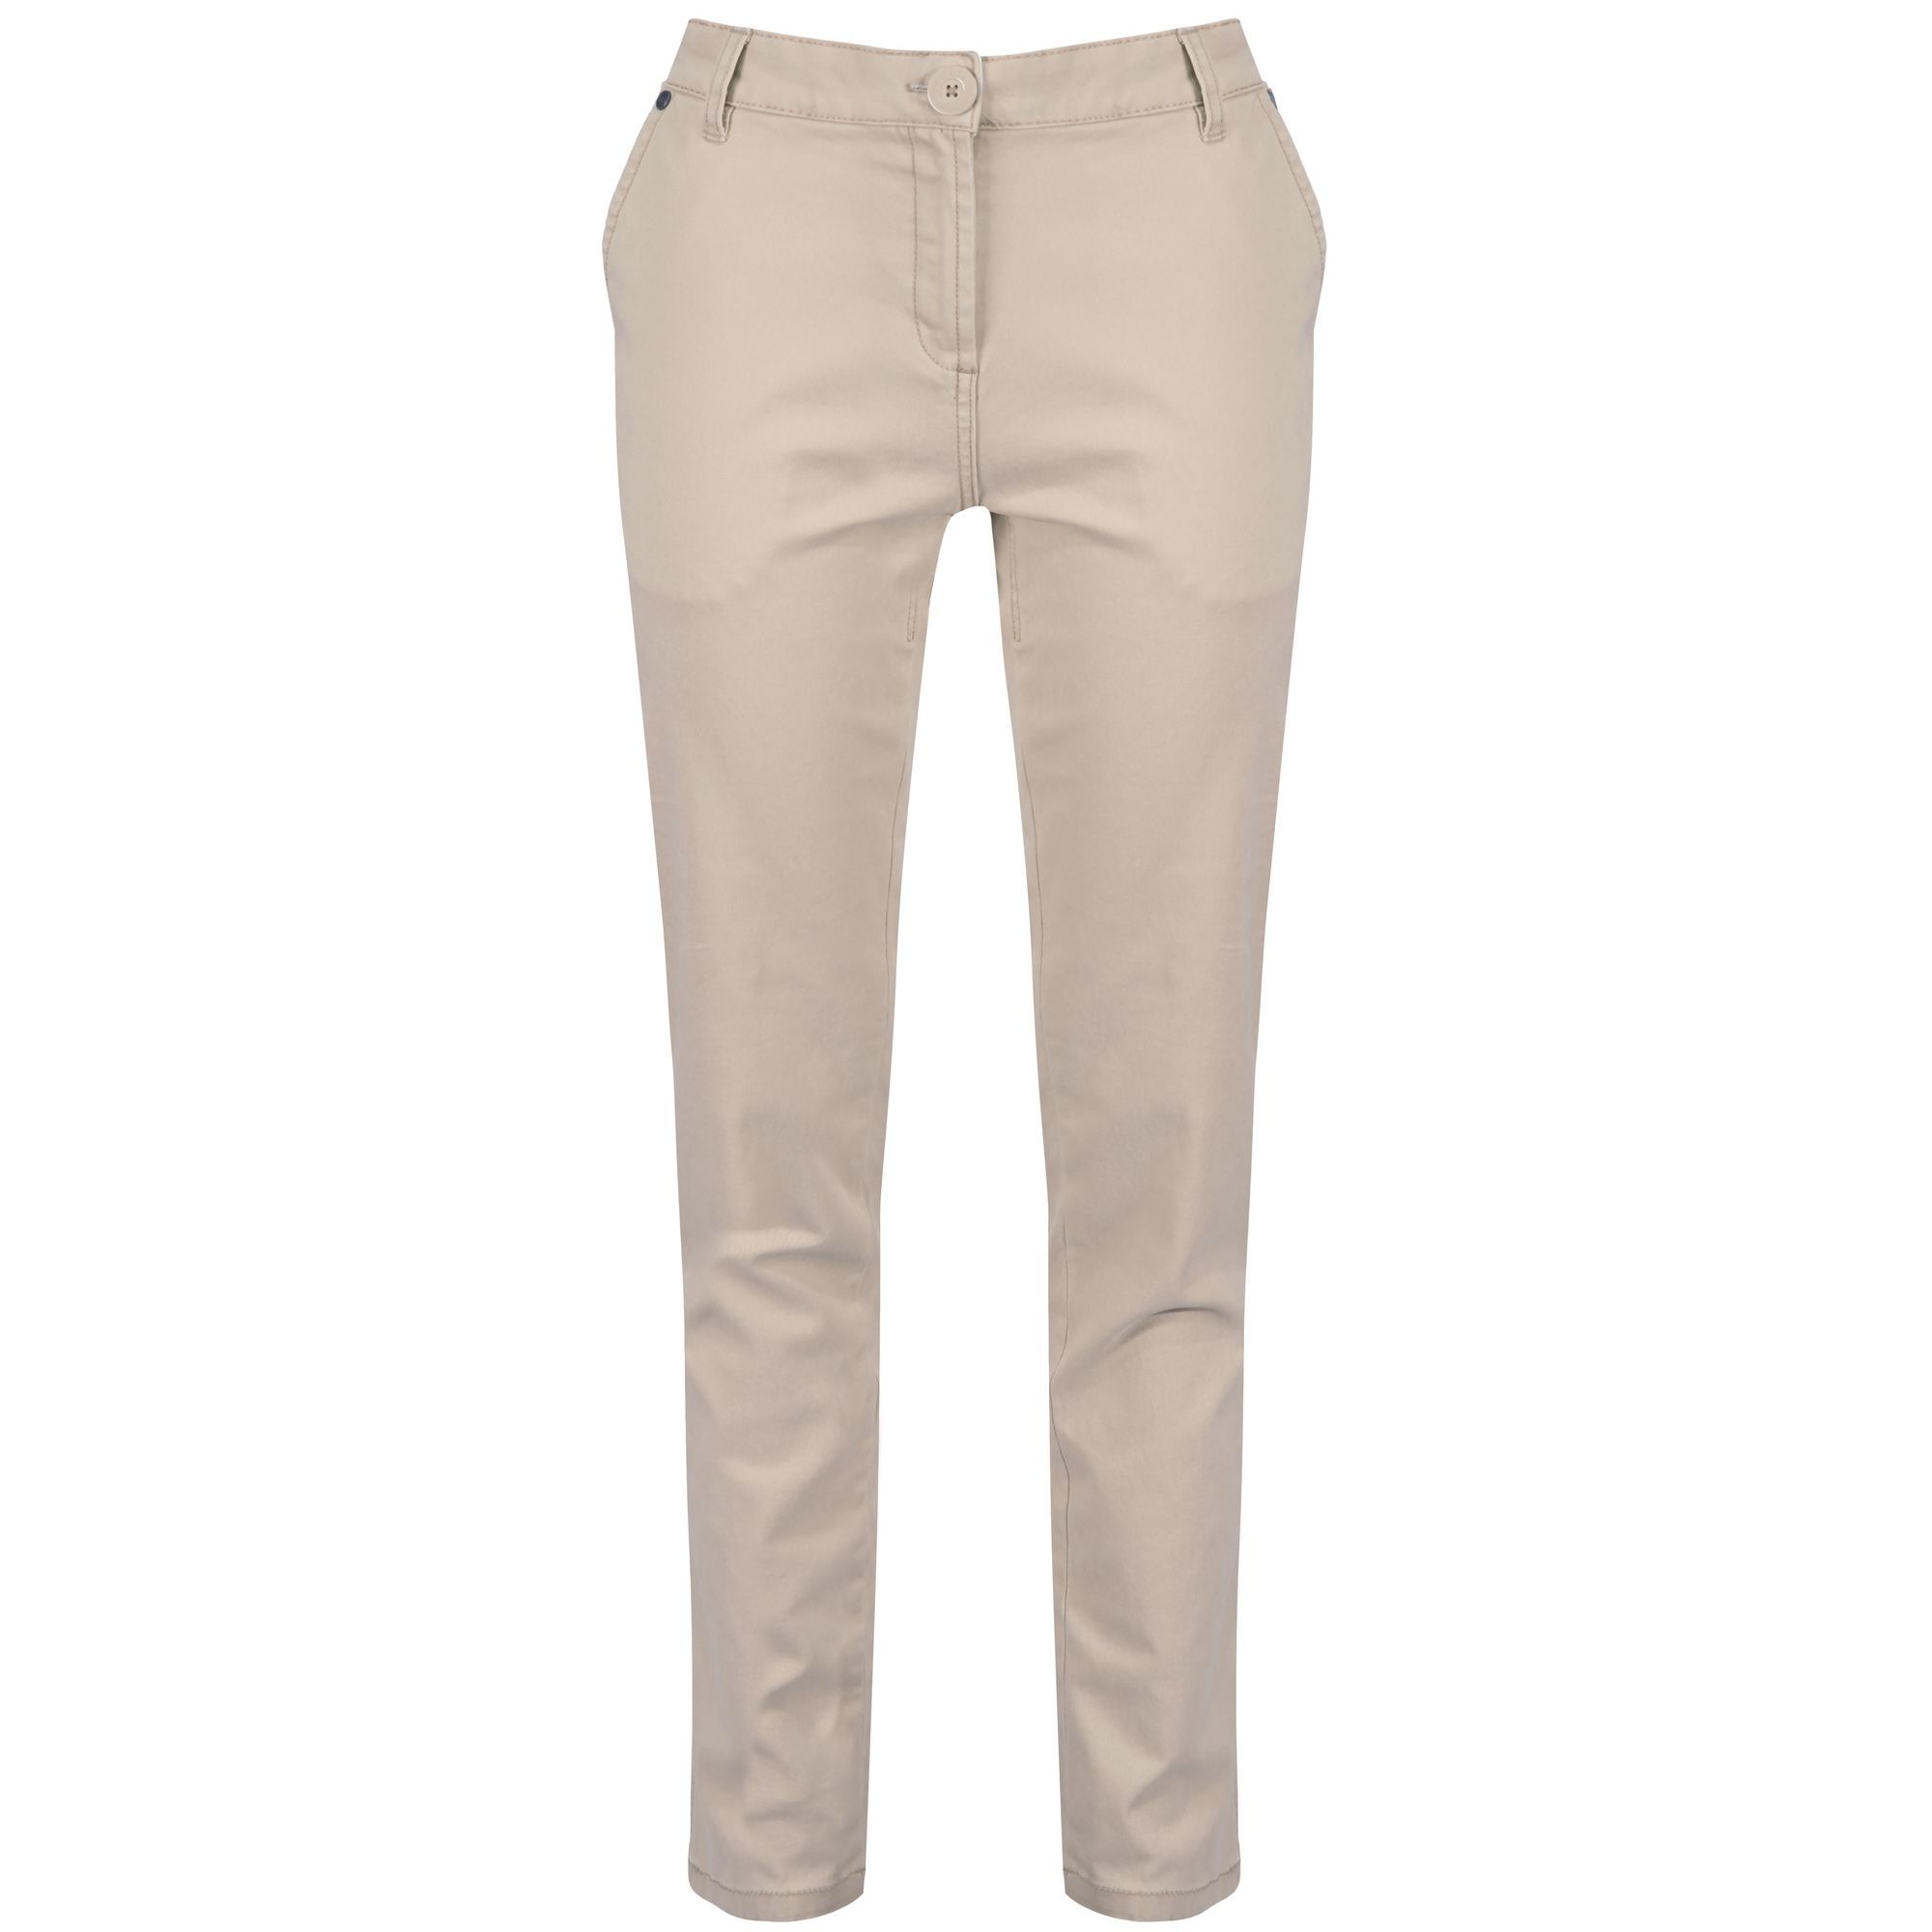 Womens Chino trousers made of cool weave Hybrid 98% Cotton/2% Spandex twill fabric. Garment washed for softer handle. Printed inner waistband.